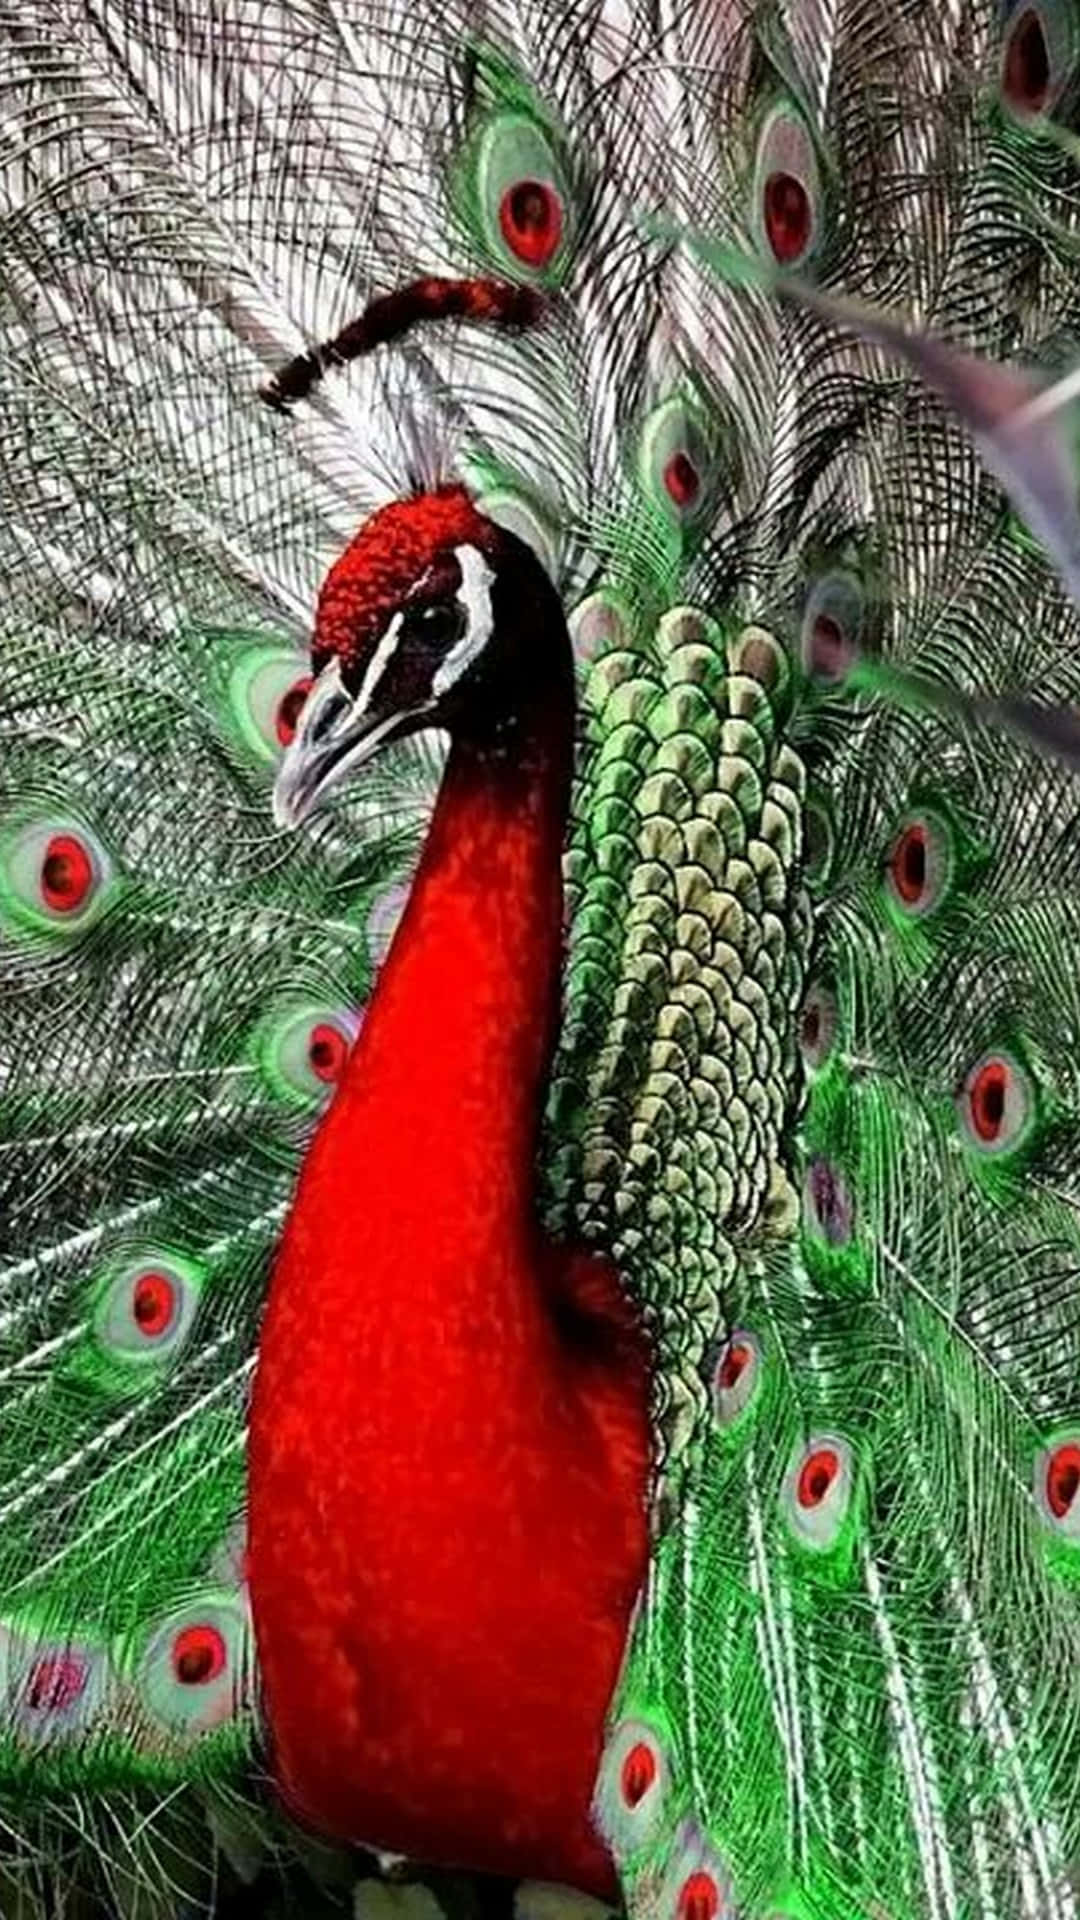 Vibrant Display Of A Majestic Peacock